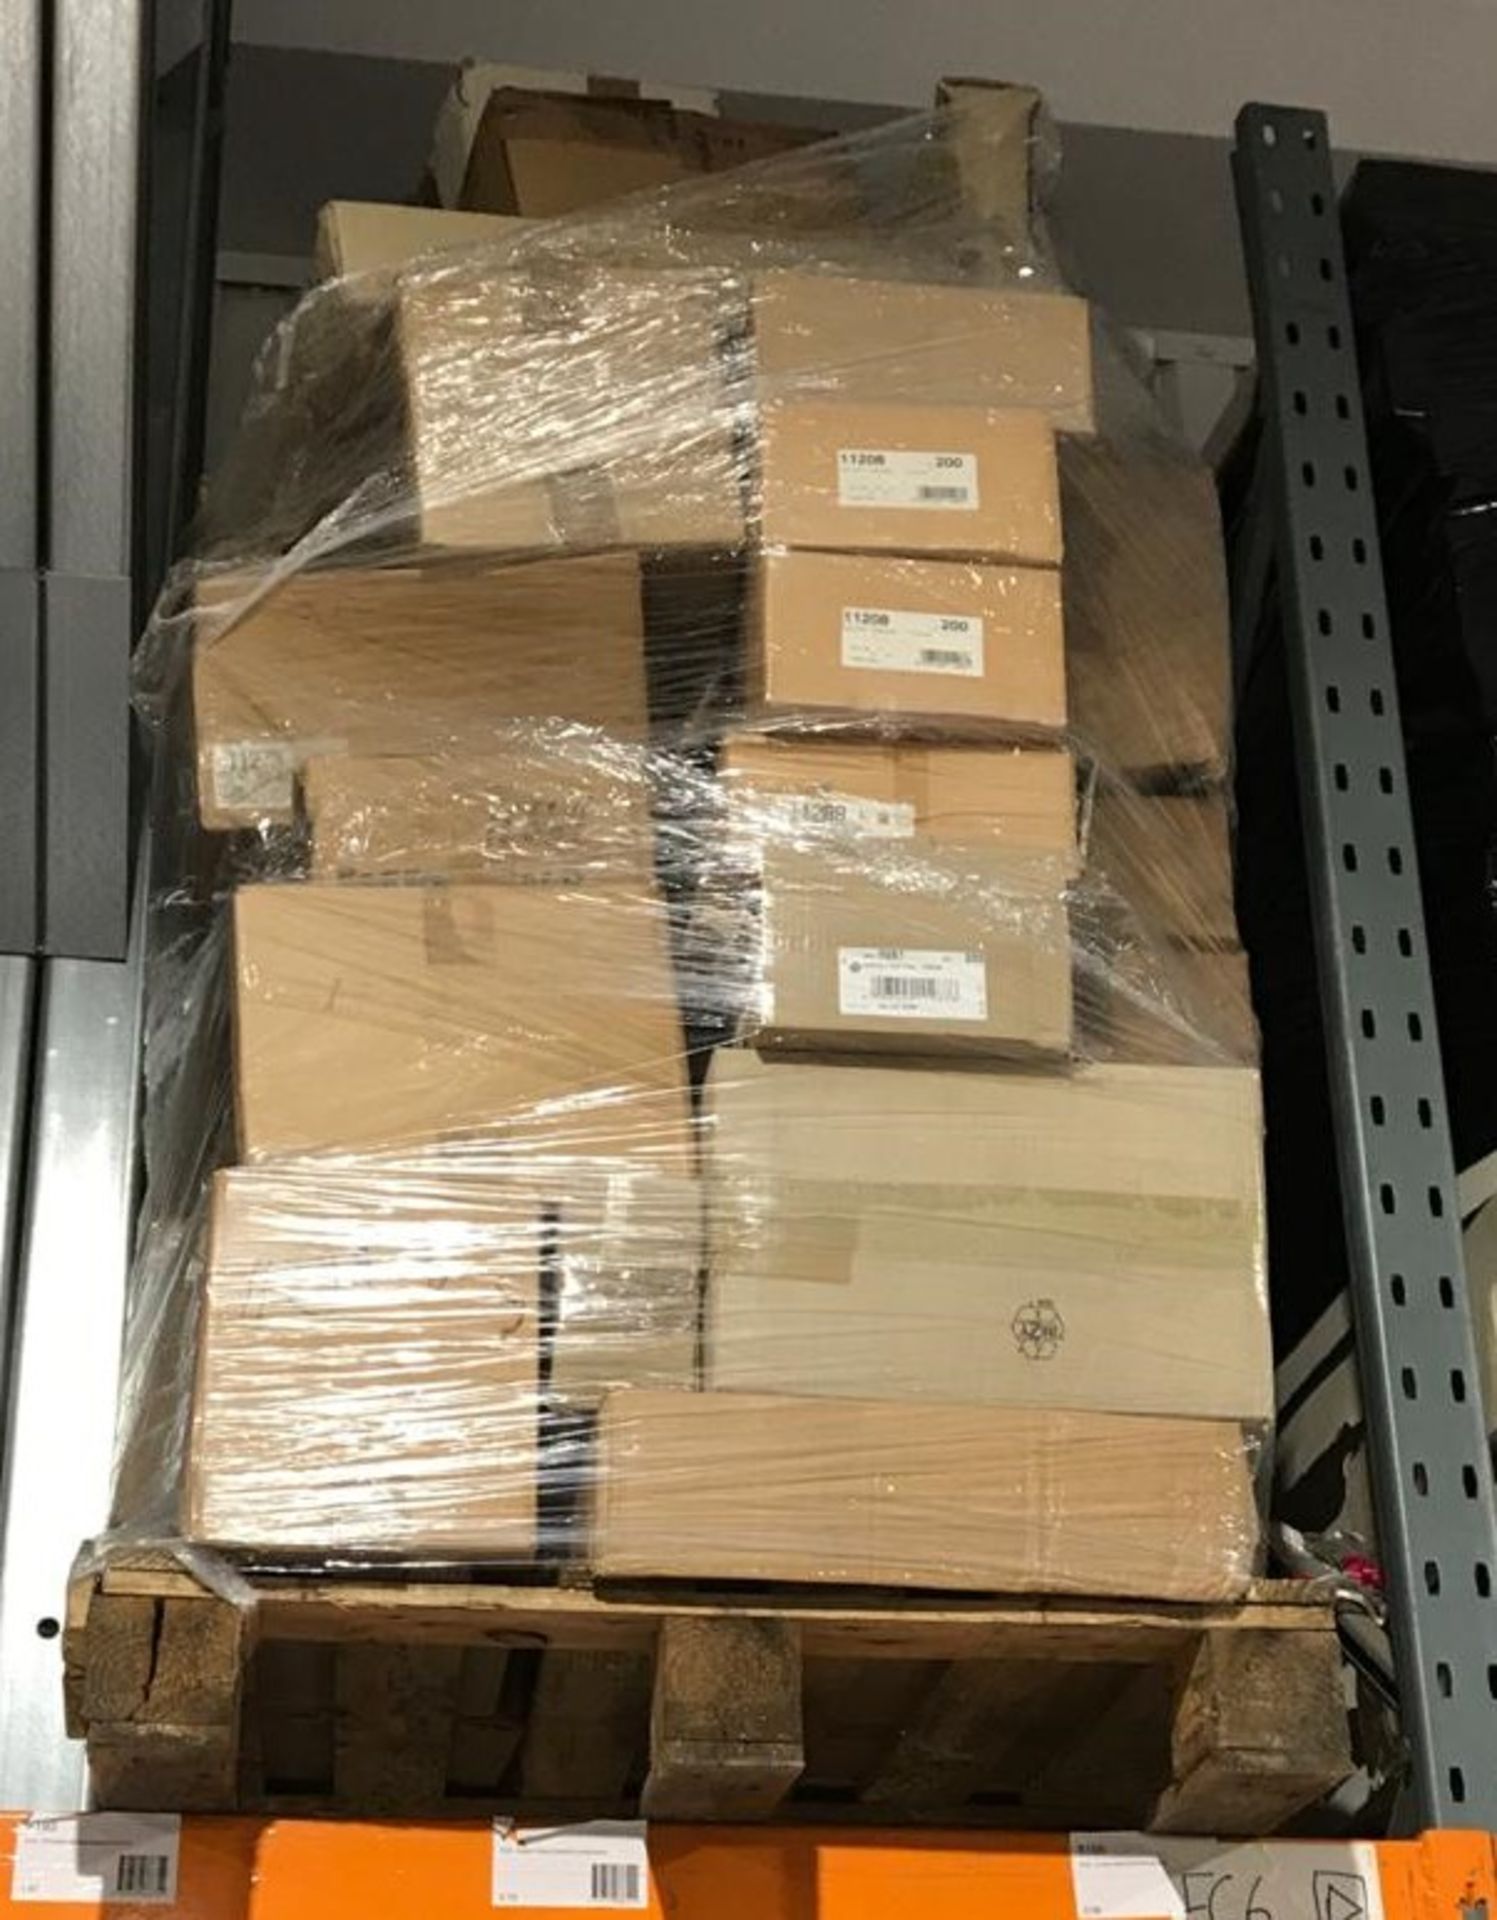 Assorted Mixed Pallet Job Lot - Mystery Pallet From Giftware Wholesaler - Ref: High Rack - Location: